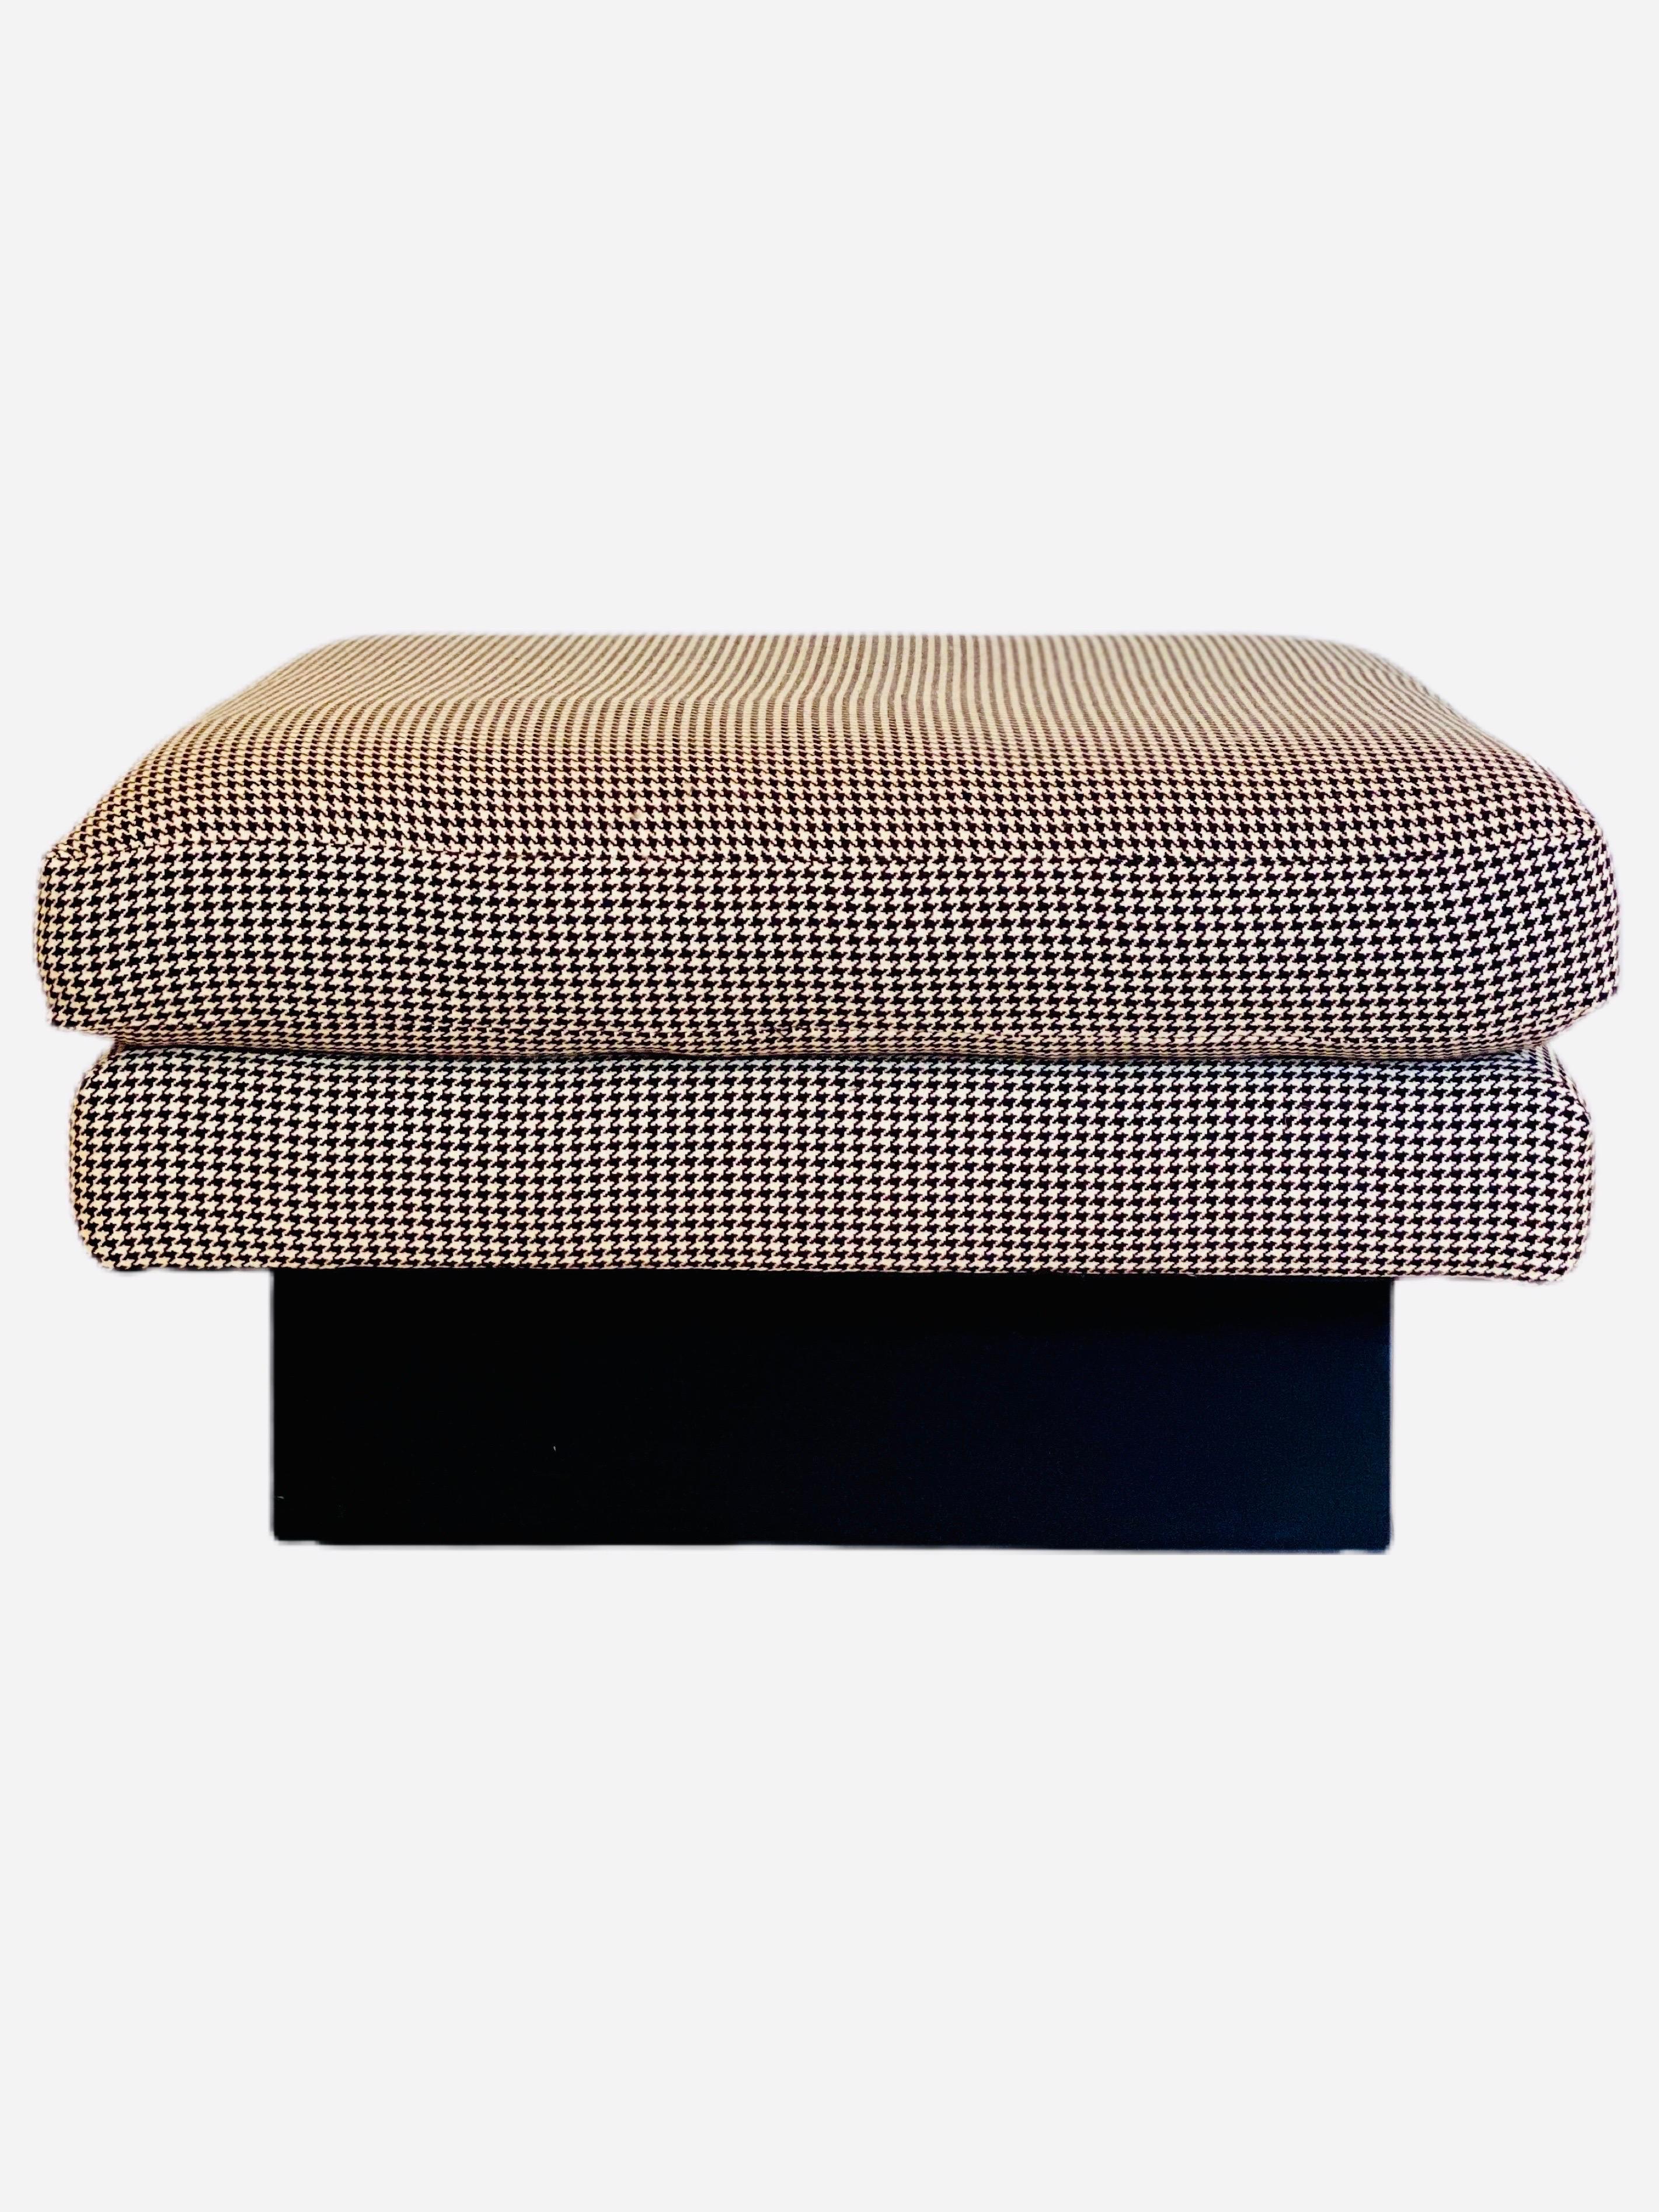 We are very pleased to offer a chic, large set of ottomans, circa the 1990s. A raised silhouette takes front stage in this fashionable duo. It starts at the base, an upholstered plinth in a black fabric sets the tone for an iconic symbol, the